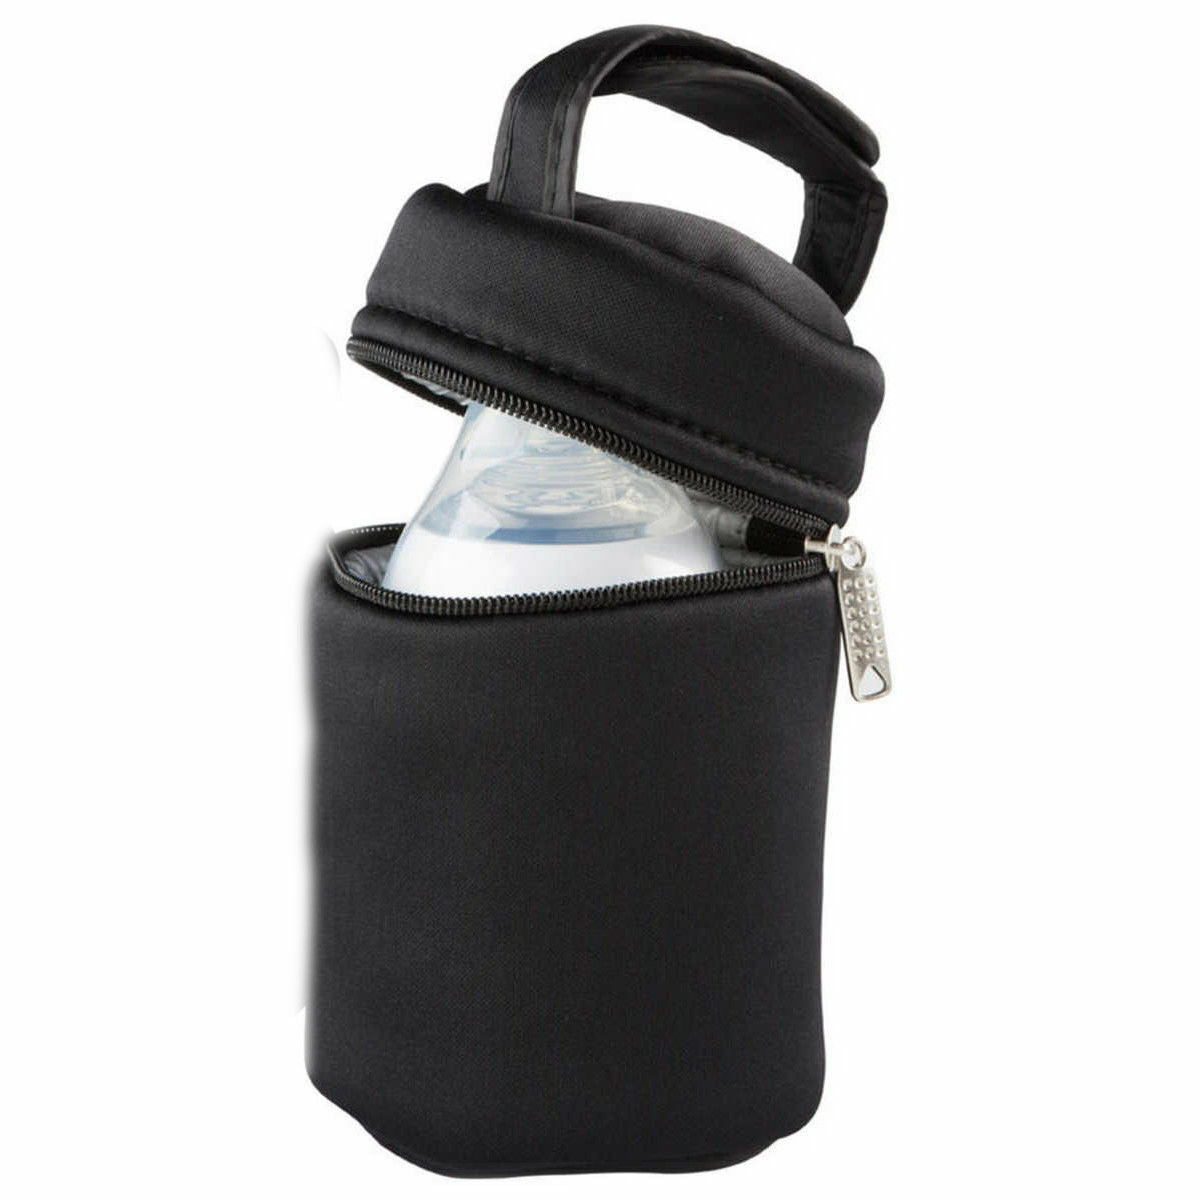 Baby Bottle Carriers Warmer Bags Tommee Tippee Closer to Nature Insulated